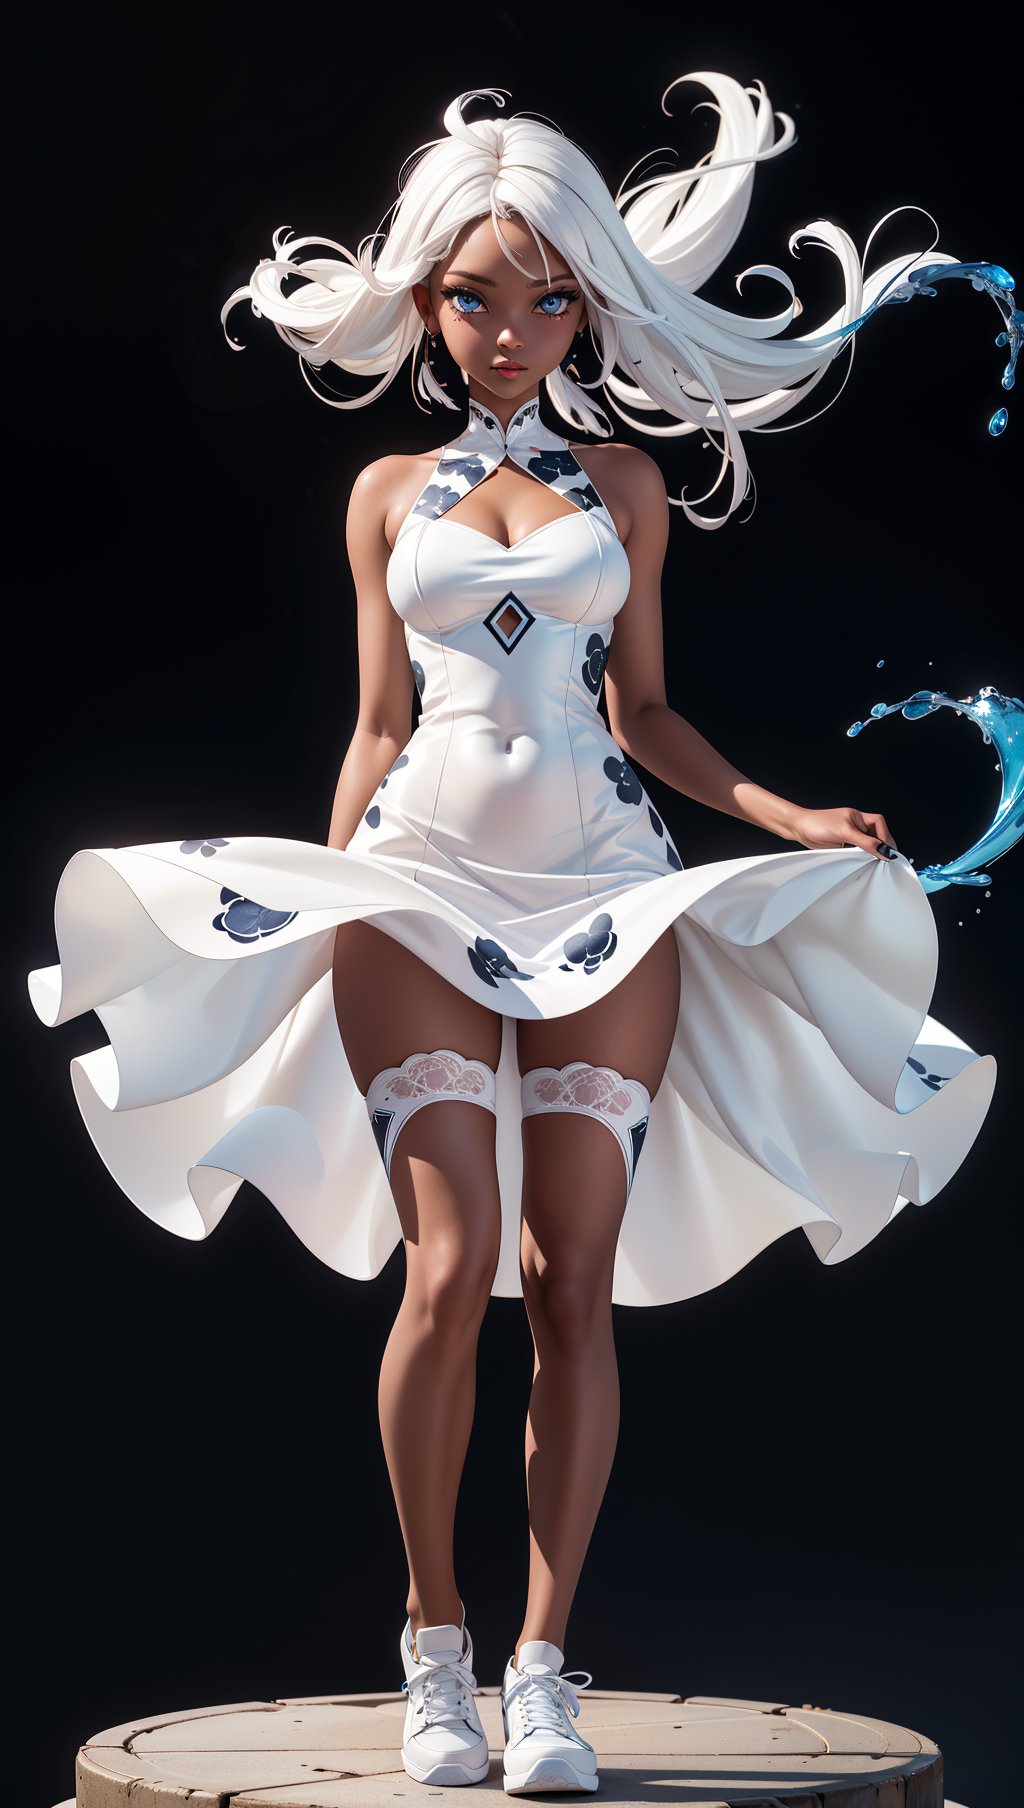 a woman with white hair and blue eyes,in a white dress with a black background and a splashs of paint all over,Celestial Skin,dark skin,flower-pattern,see-through white dress,black under cloths,facing viewer,hair blowing in the wind,white shoes,fantasy,white fires all over,